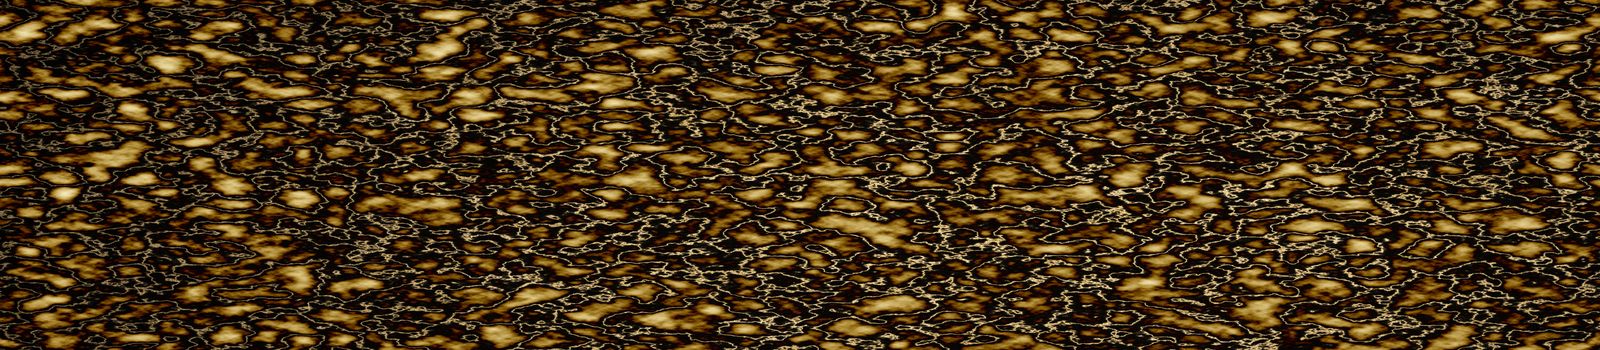 panorama dark gold abstract line art marble pattern texture luxury interior wall tile